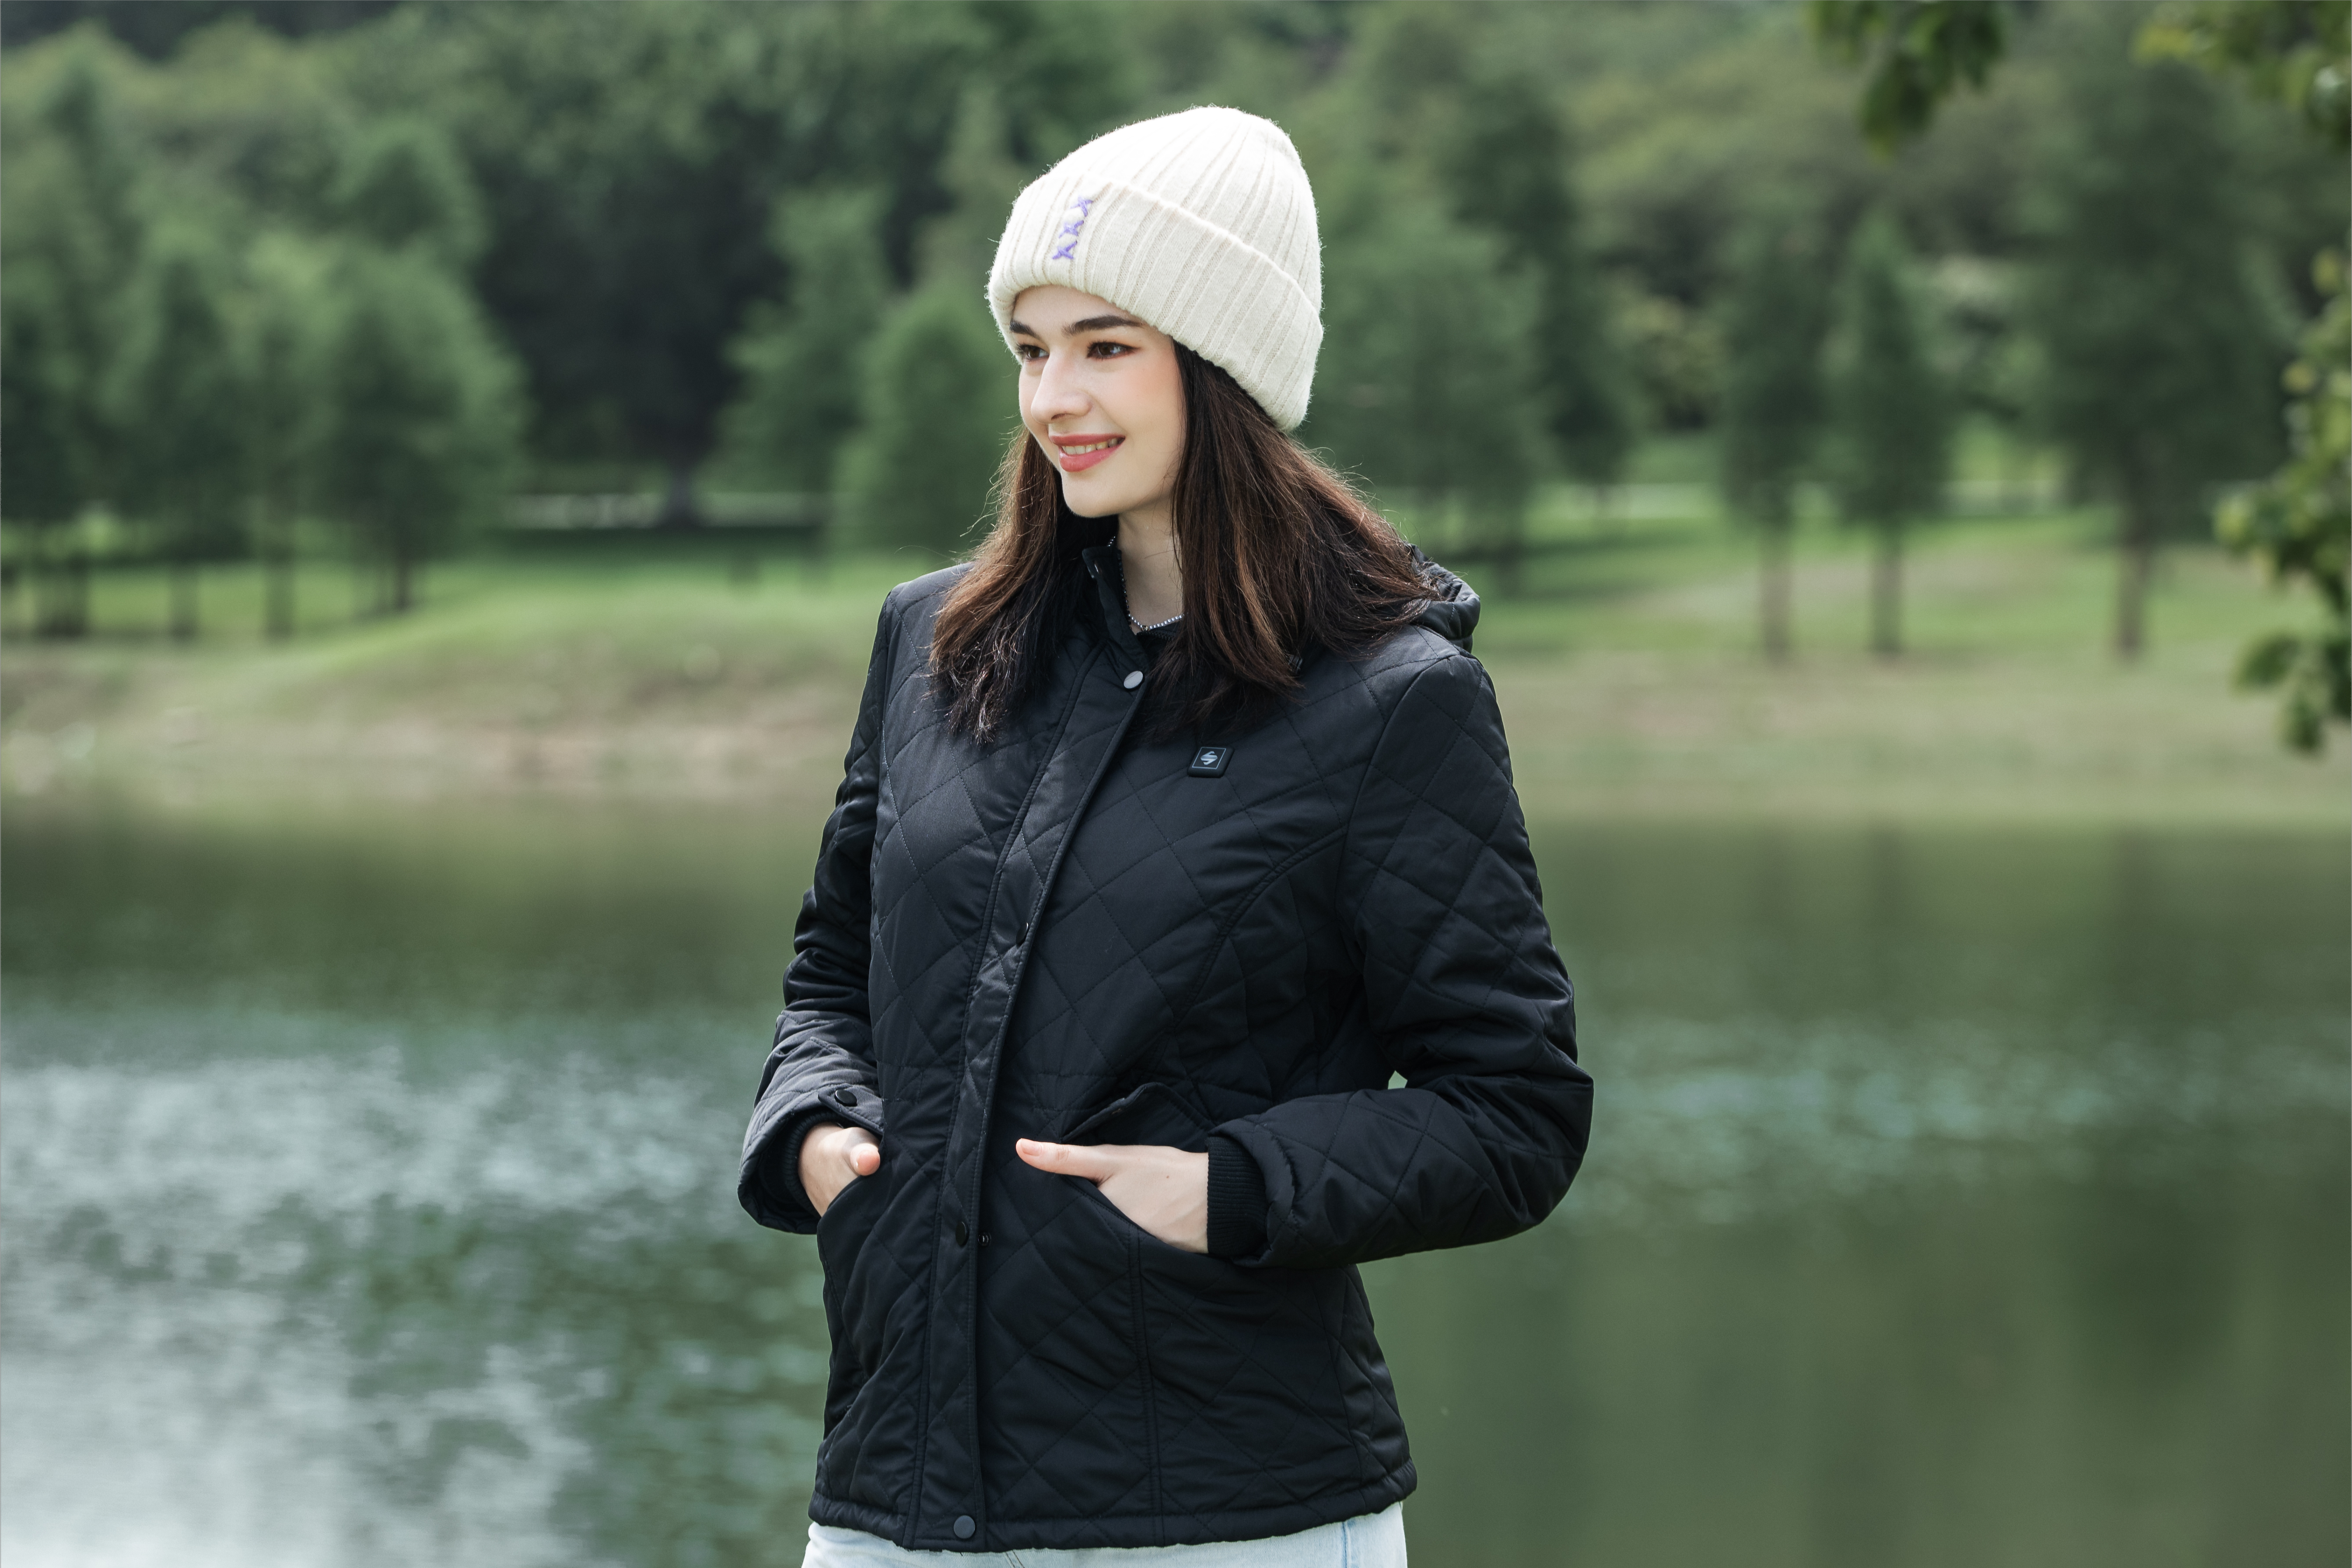 Are Heated Jackets Bad For Your Health?